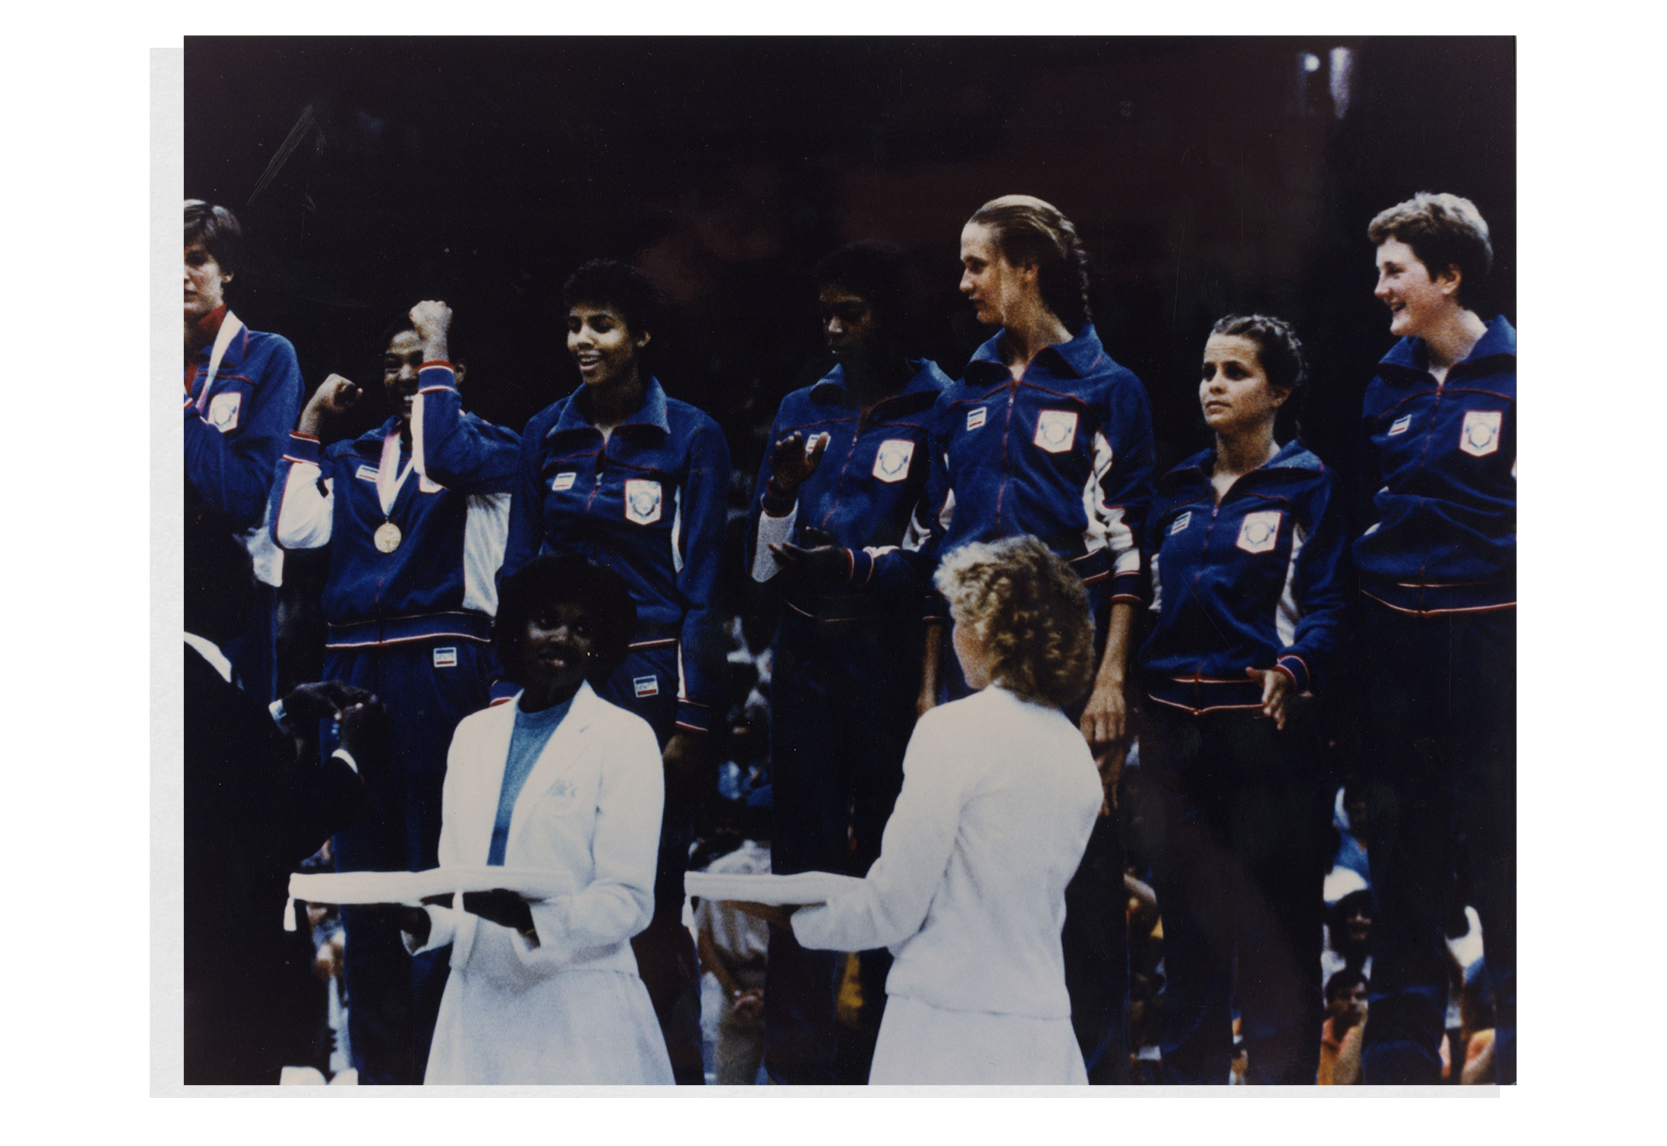 Members of the U.S. women’s national basketball team who won the gold medal in the 1984 Olympics standing on a podium at an award ceremony. Denise Curry, a graduate of the UCLA College and a former Bruin basketball player, is pictured (far right) looking as medals are being handed out.